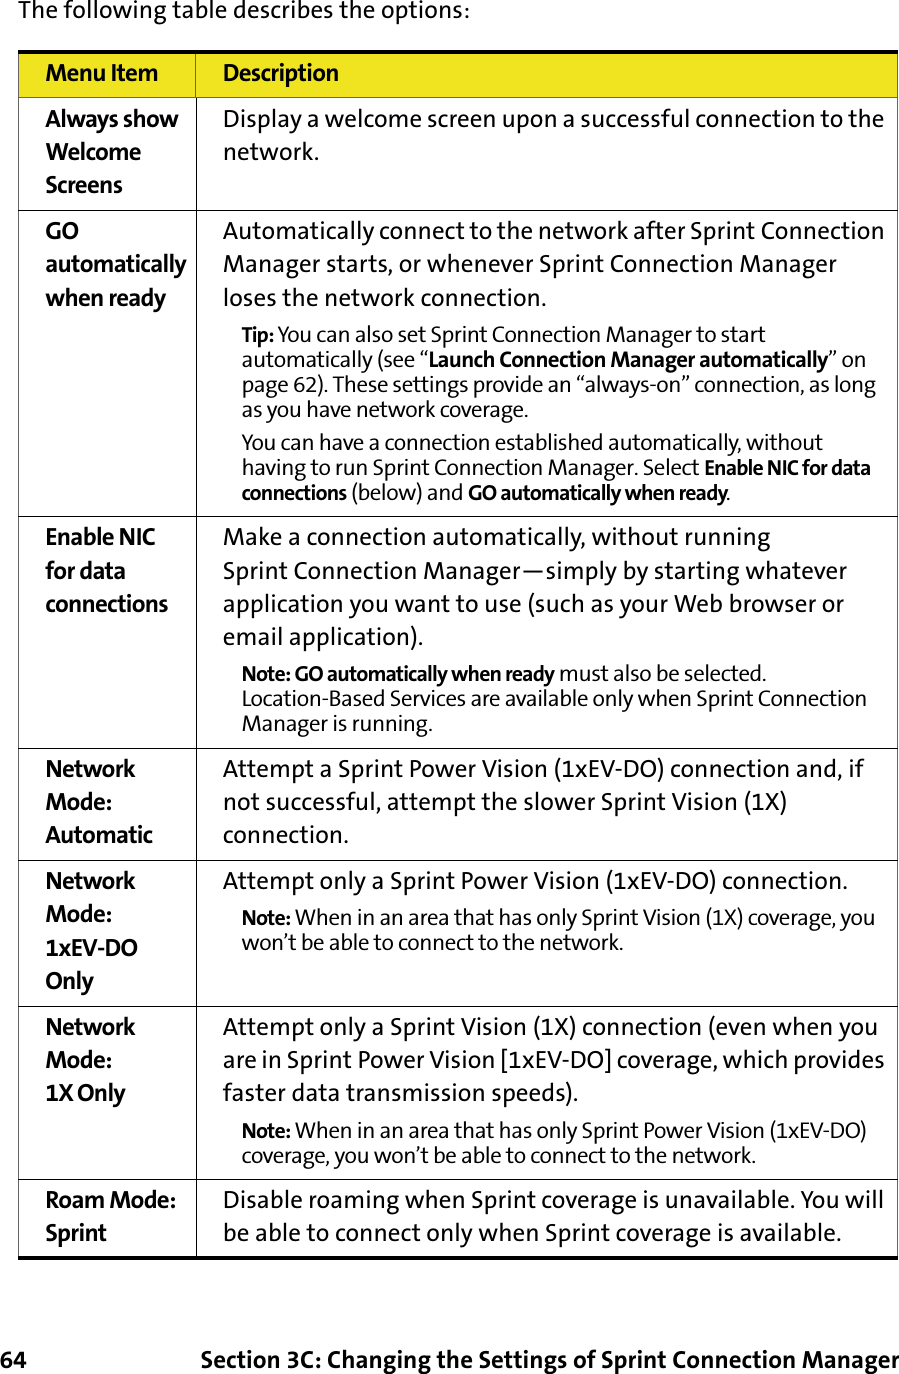 64 Section 3C: Changing the Settings of Sprint Connection ManagerThe following table describes the options:Menu Item DescriptionAlways show Welcome ScreensDisplay a welcome screen upon a successful connection to the network.GO automatically when readyAutomatically connect to the network after Sprint Connection Manager starts, or whenever Sprint Connection Manager loses the network connection.Tip: You can also set Sprint Connection Manager to start automatically (see “Launch Connection Manager automatically” on page 62). These settings provide an “always-on” connection, as long as you have network coverage.You can have a connection established automatically, without having to run Sprint Connection Manager. Select Enable NIC for data connections (below) and GO automatically when ready. Enable NIC for data connectionsMake a connection automatically, without running Sprint Connection Manager—simply by starting whatever application you want to use (such as your Web browser or email application).Note: GO automatically when ready must also be selected.Location-Based Services are available only when Sprint Connection Manager is running.Network Mode: AutomaticAttempt a Sprint Power Vision (1xEV-DO) connection and, if not successful, attempt the slower Sprint Vision (1X) connection.Network Mode: 1xEV-DO OnlyAttempt only a Sprint Power Vision (1xEV-DO) connection.Note: When in an area that has only Sprint Vision (1X) coverage, you won’t be able to connect to the network.Network Mode: 1X OnlyAttempt only a Sprint Vision (1X) connection (even when you are in Sprint Power Vision [1xEV-DO] coverage, which provides faster data transmission speeds).Note: When in an area that has only Sprint Power Vision (1xEV-DO) coverage, you won’t be able to connect to the network.Roam Mode: SprintDisable roaming when Sprint coverage is unavailable. You will be able to connect only when Sprint coverage is available.